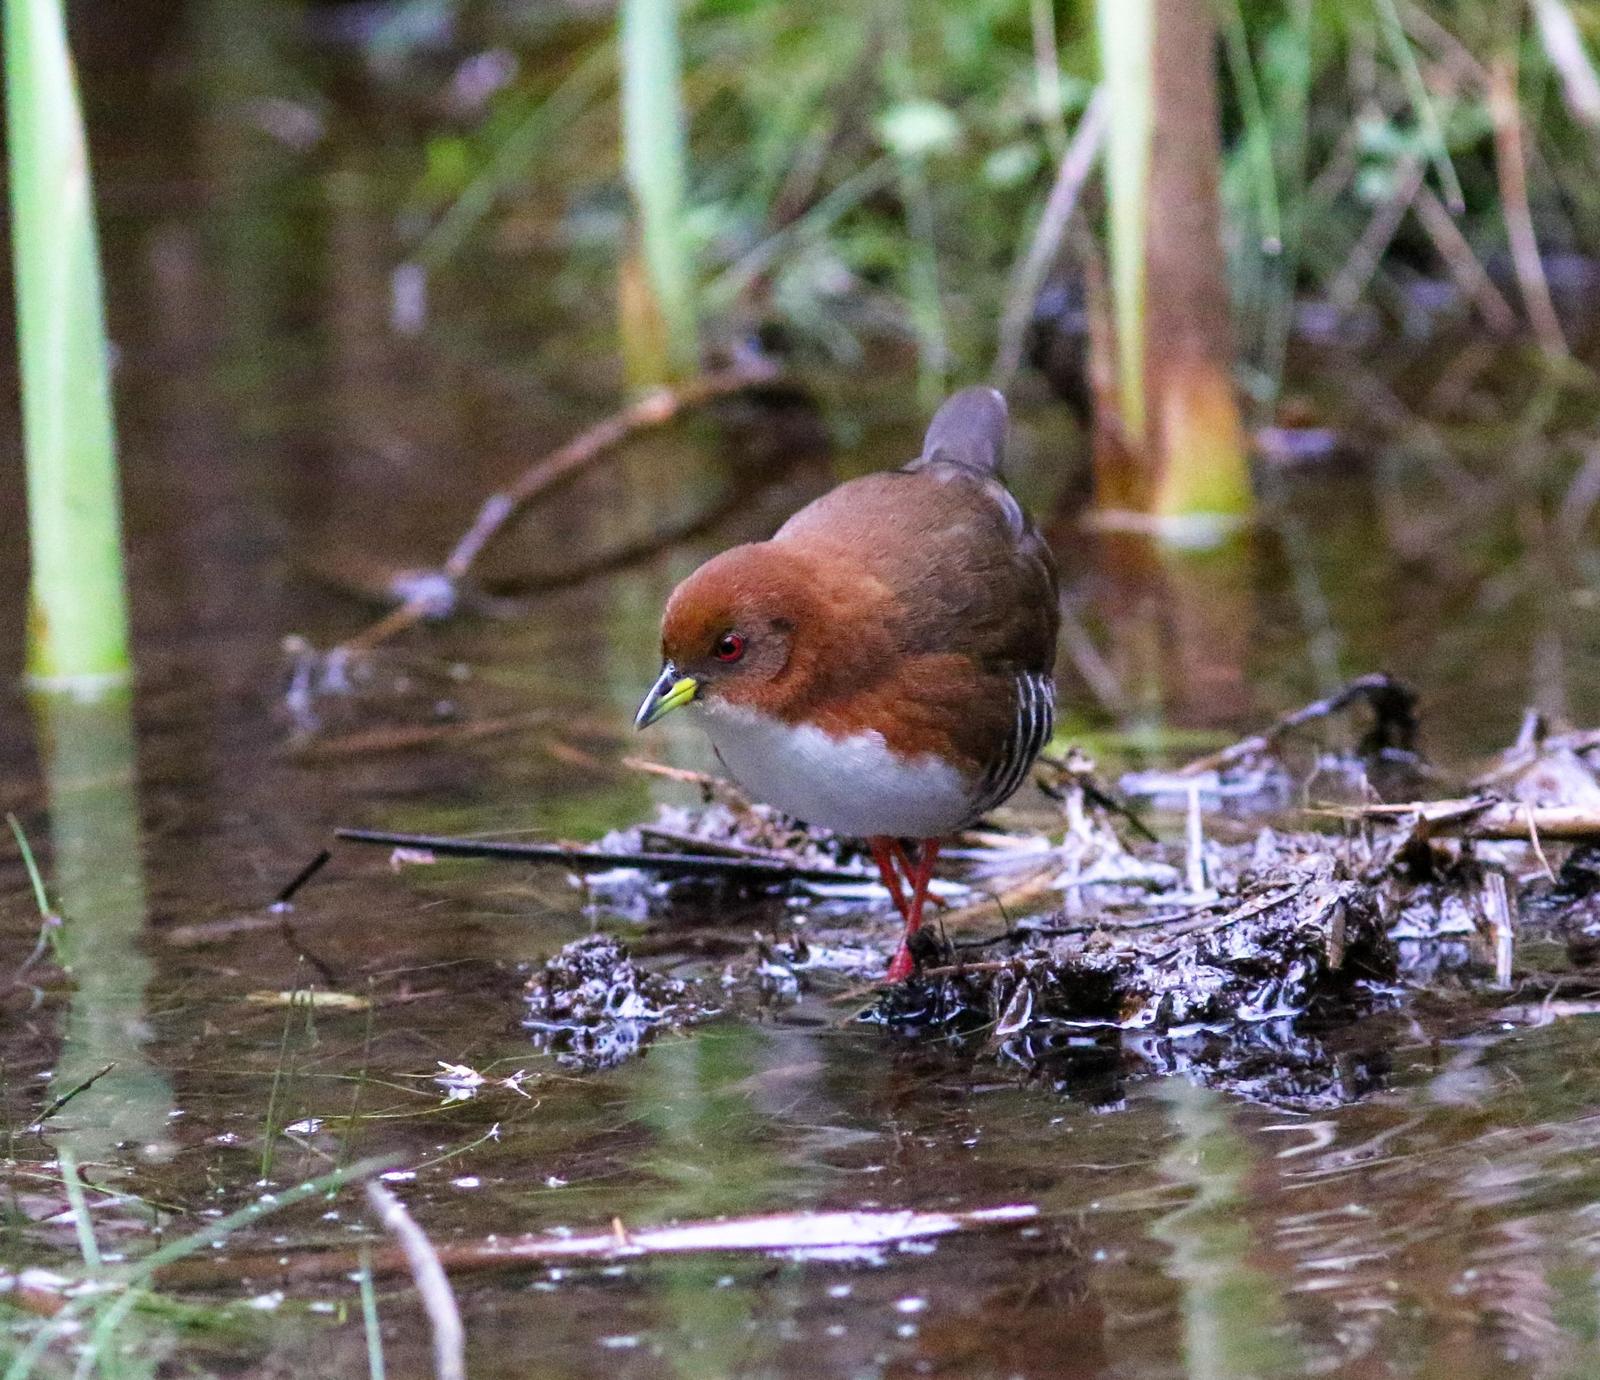 Red-and-white Crake Photo by Leonardo Garrigues